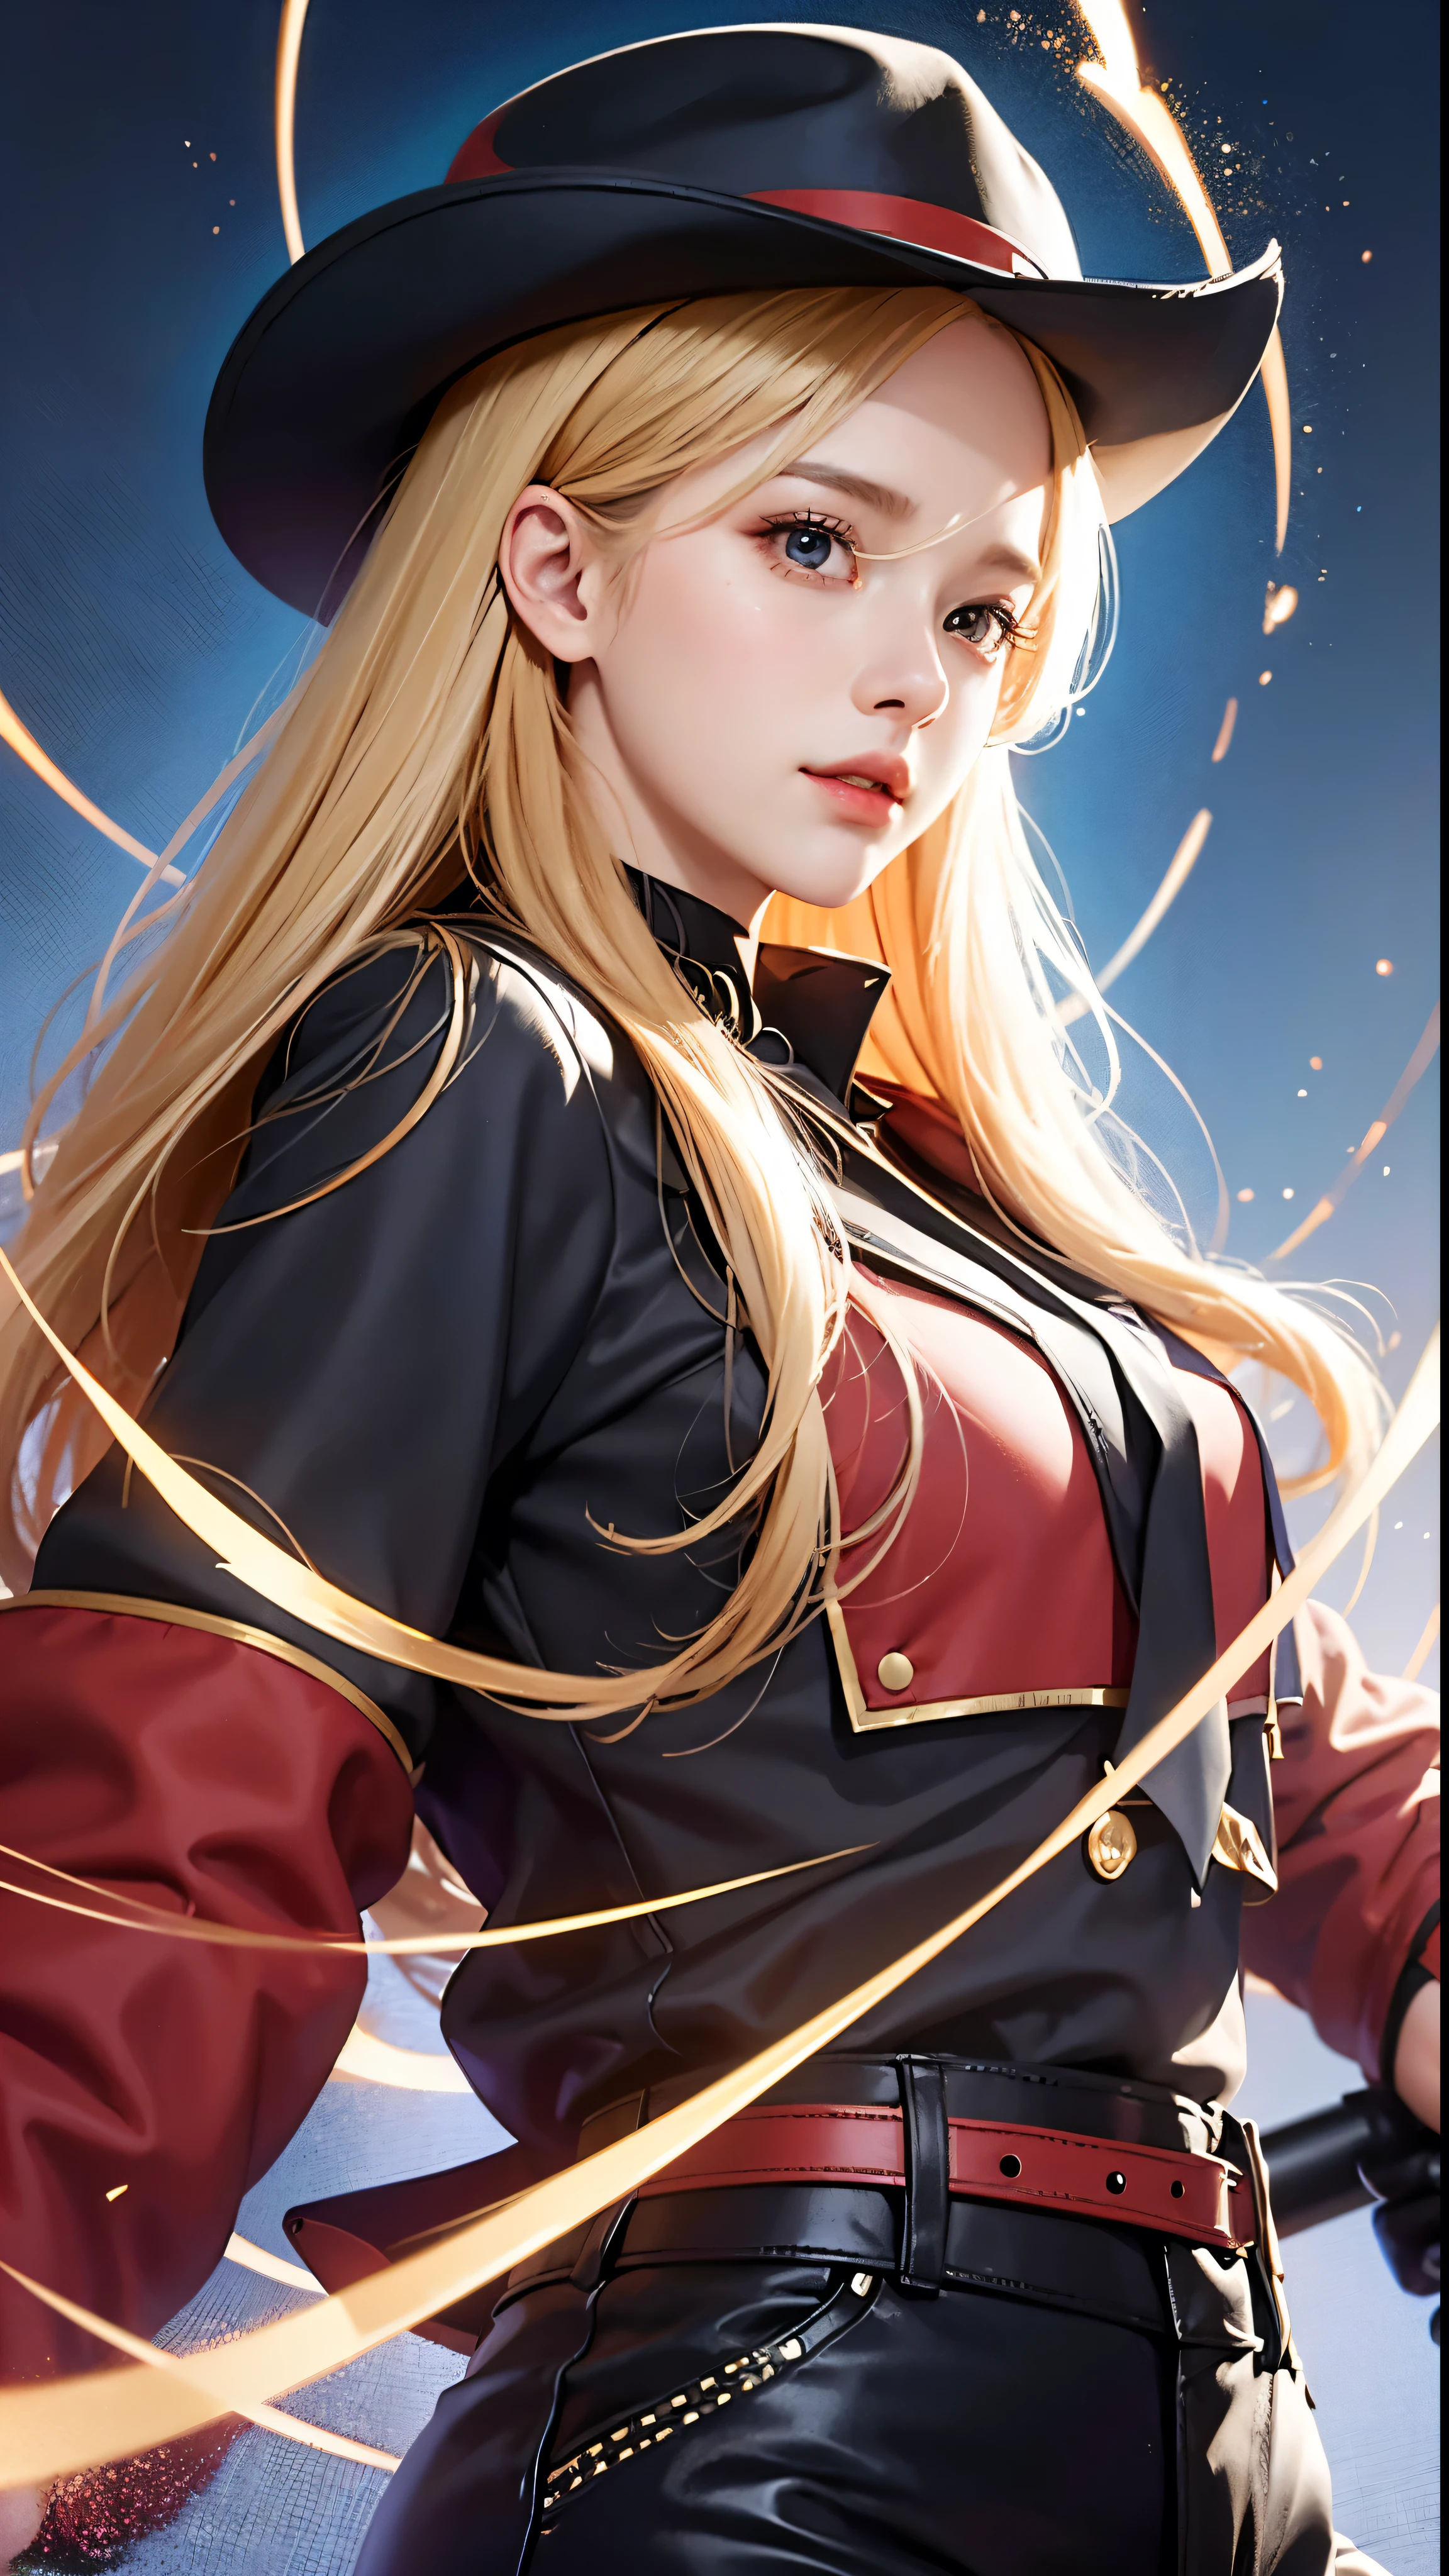 (Realistic:0.2)、Anime illustration、 1 Girl、Red coat、Blonde Hair、 A stage set in Paris, France『Workplace(SFW)』 Black trousers、Black office shirt、 Carmen Sandiego Features、 Bright blue sky、Dramatic long hair、 Under an impressive lightning display、 Shine light directly on your face、Magnifying Light、 Backlight、The face is illuminated、 Fill Lamp、FIL Light、(masterpiece)、 Carmen Sandiego Version 1.1 - Shurik's Artwork: 0.6